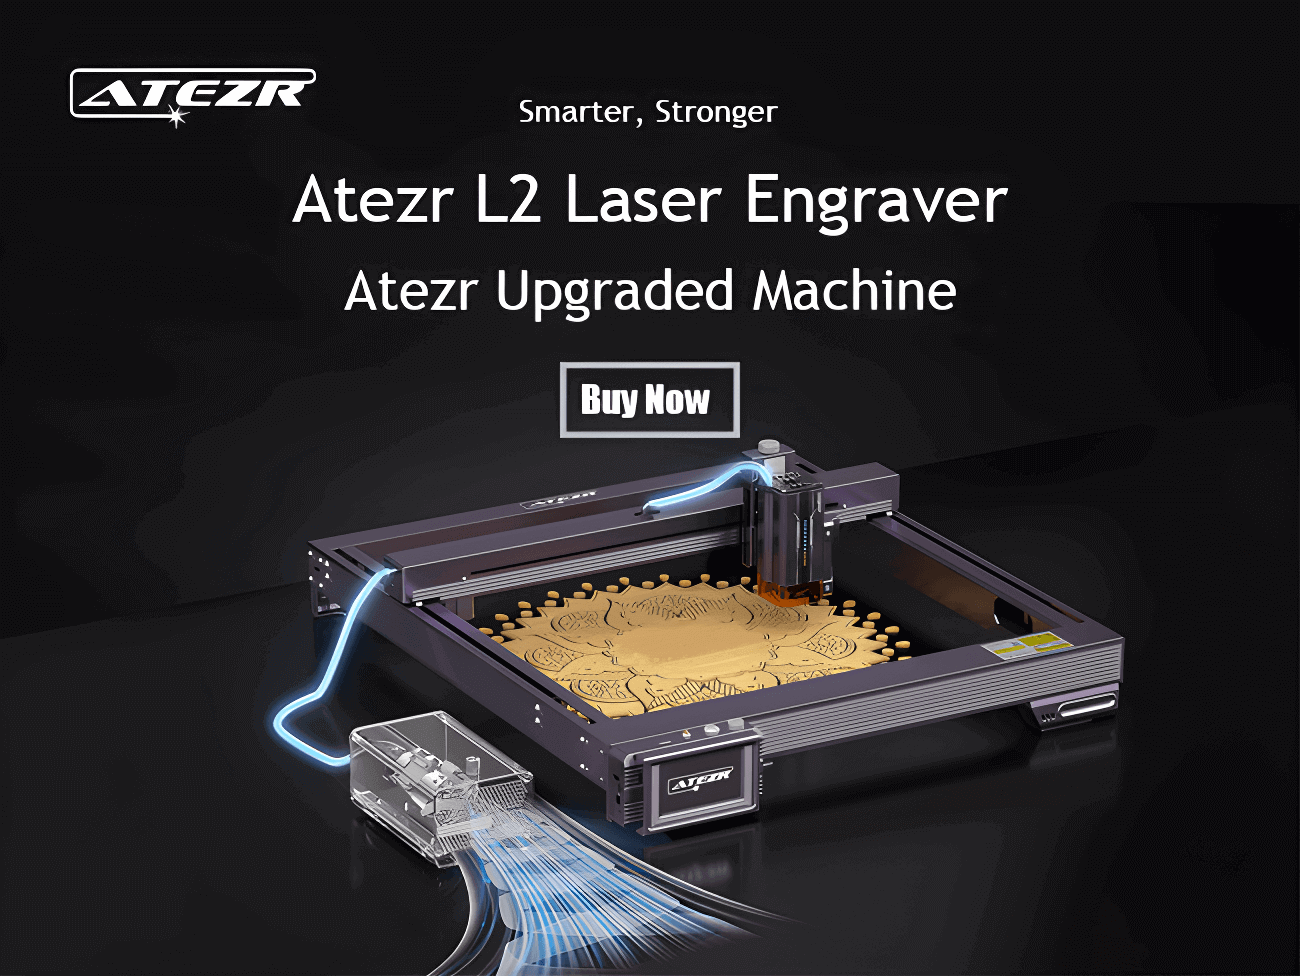 Atezr Ι Laser Engraver & Accessories Ι Aesthetics. Powerful. Stable